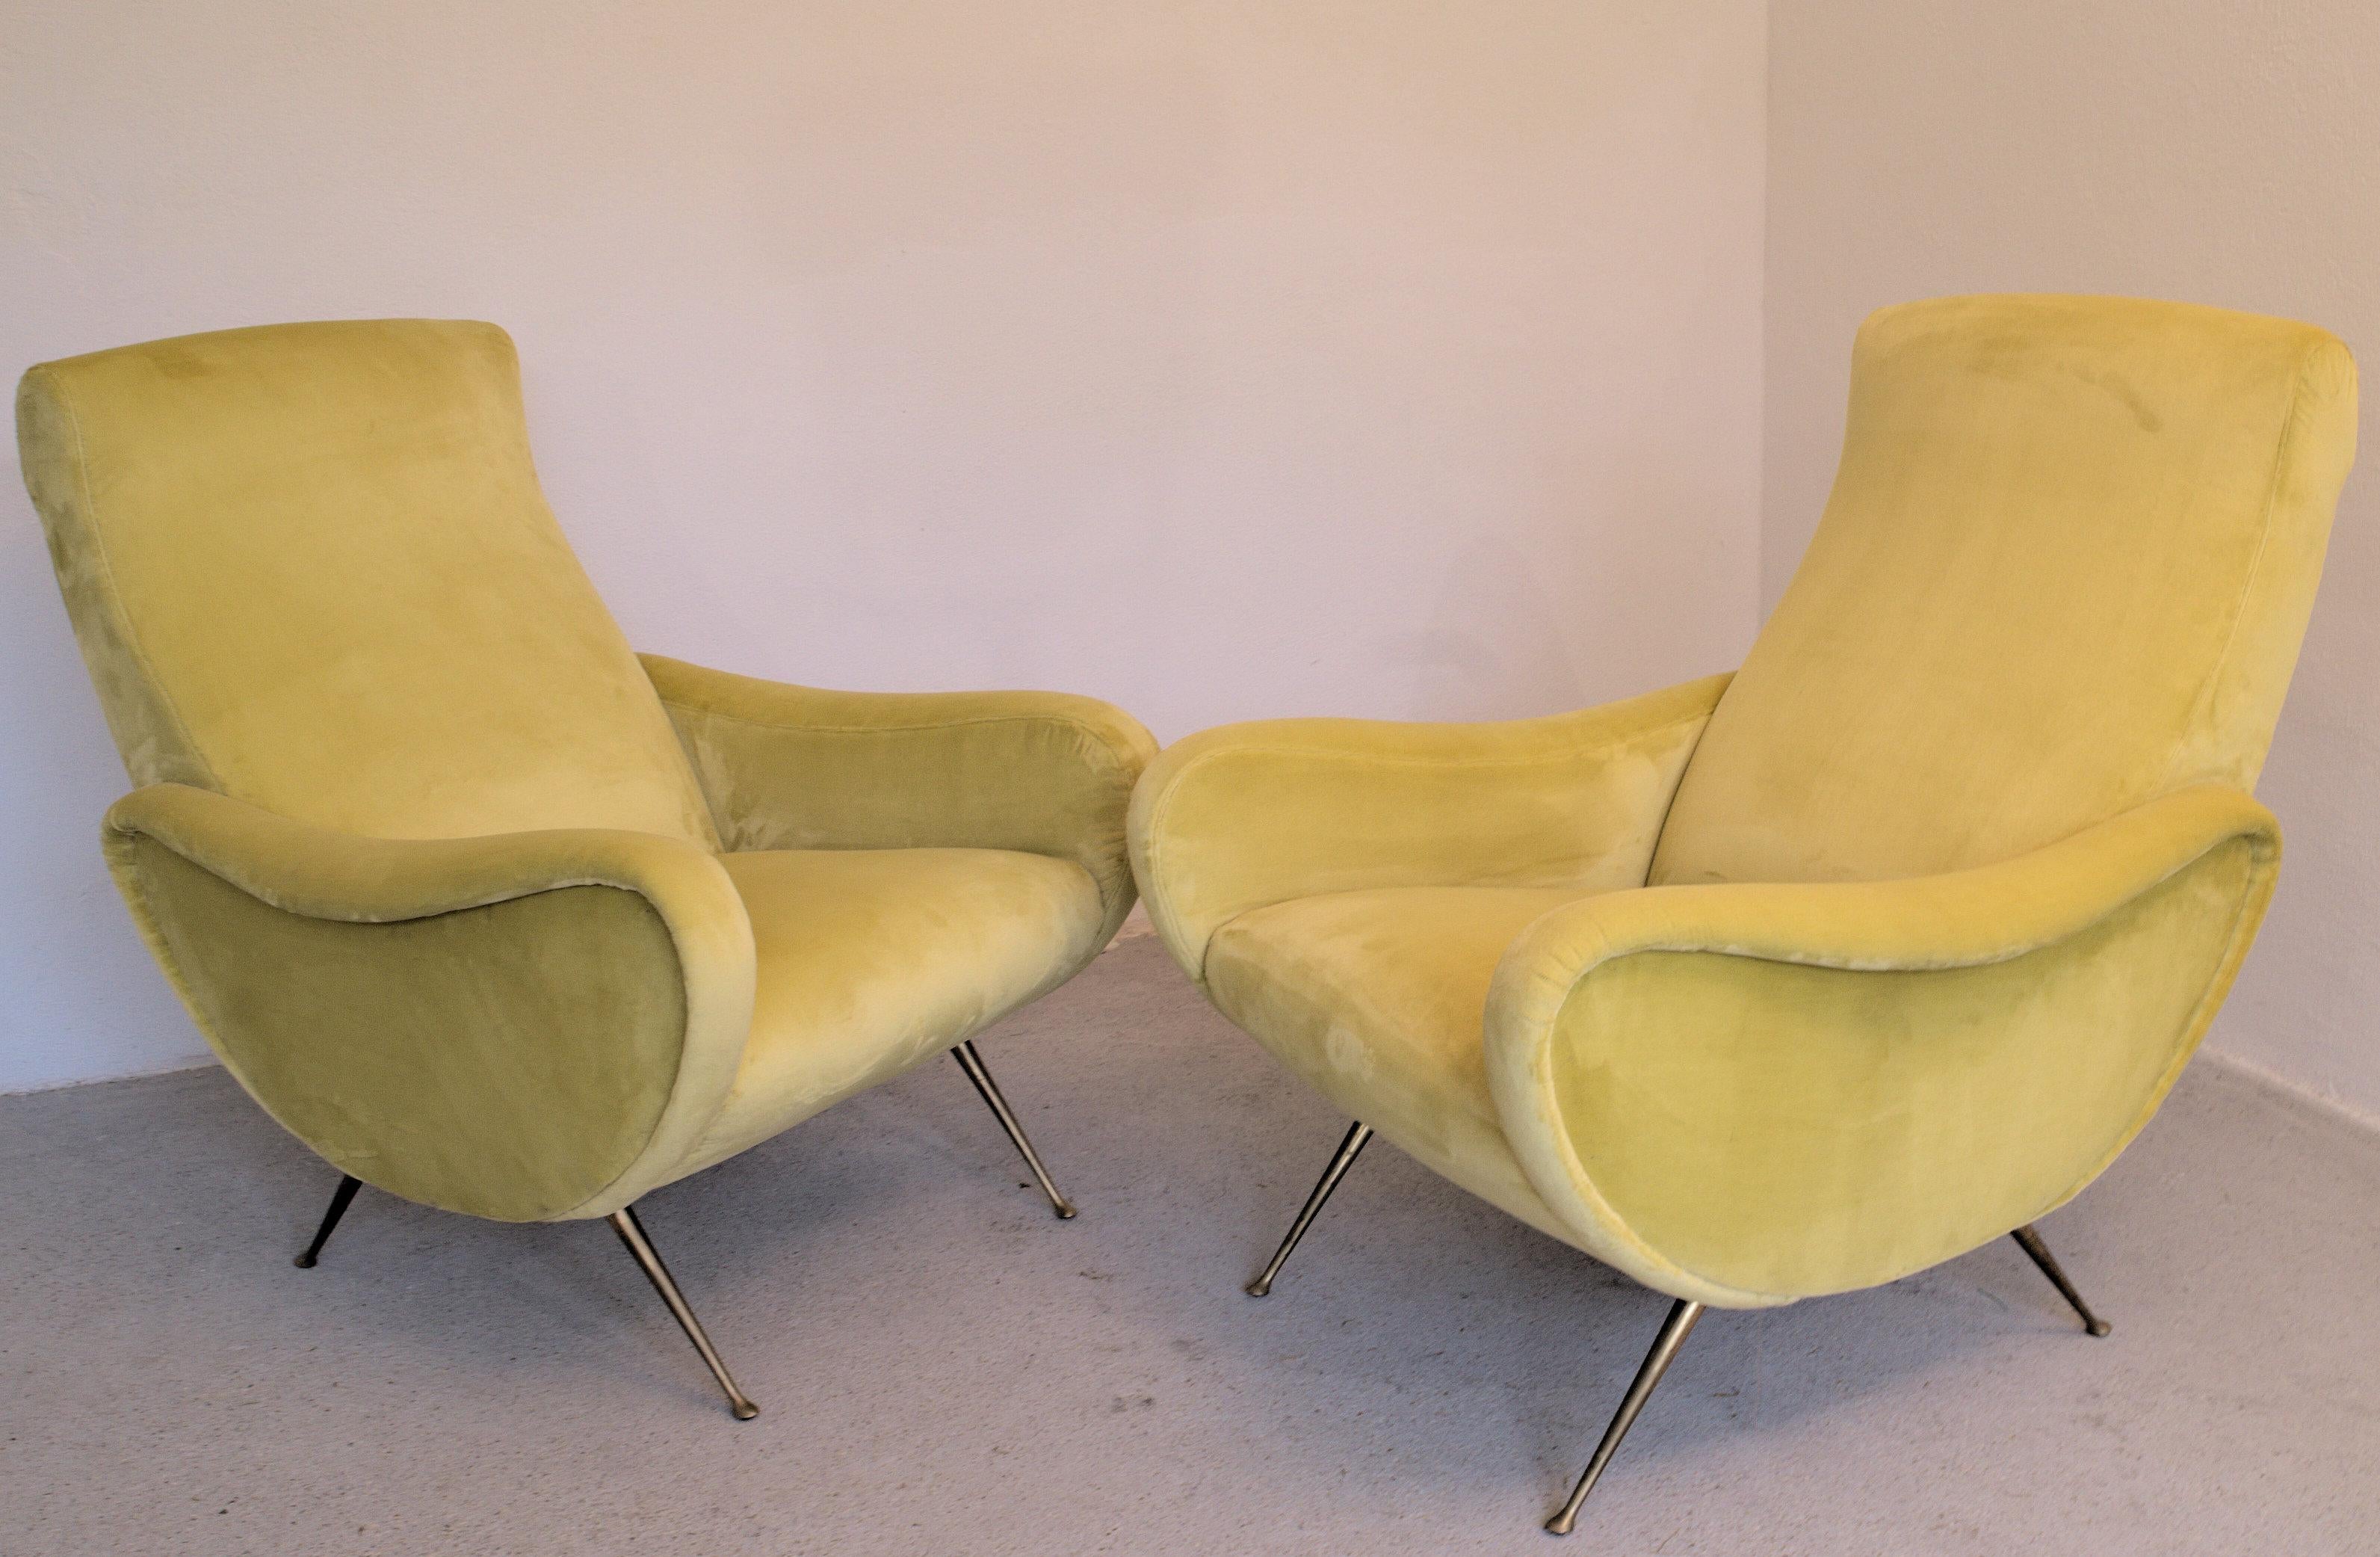 Two armchairs in the style of Marco Zanuso. 

From a villa in the lake area, completely restaured, padding replaced, belt replaced and upholstered with an Italian woven canary yellow high pile soft writing velvet. 

Upholsterer/restaurer said it